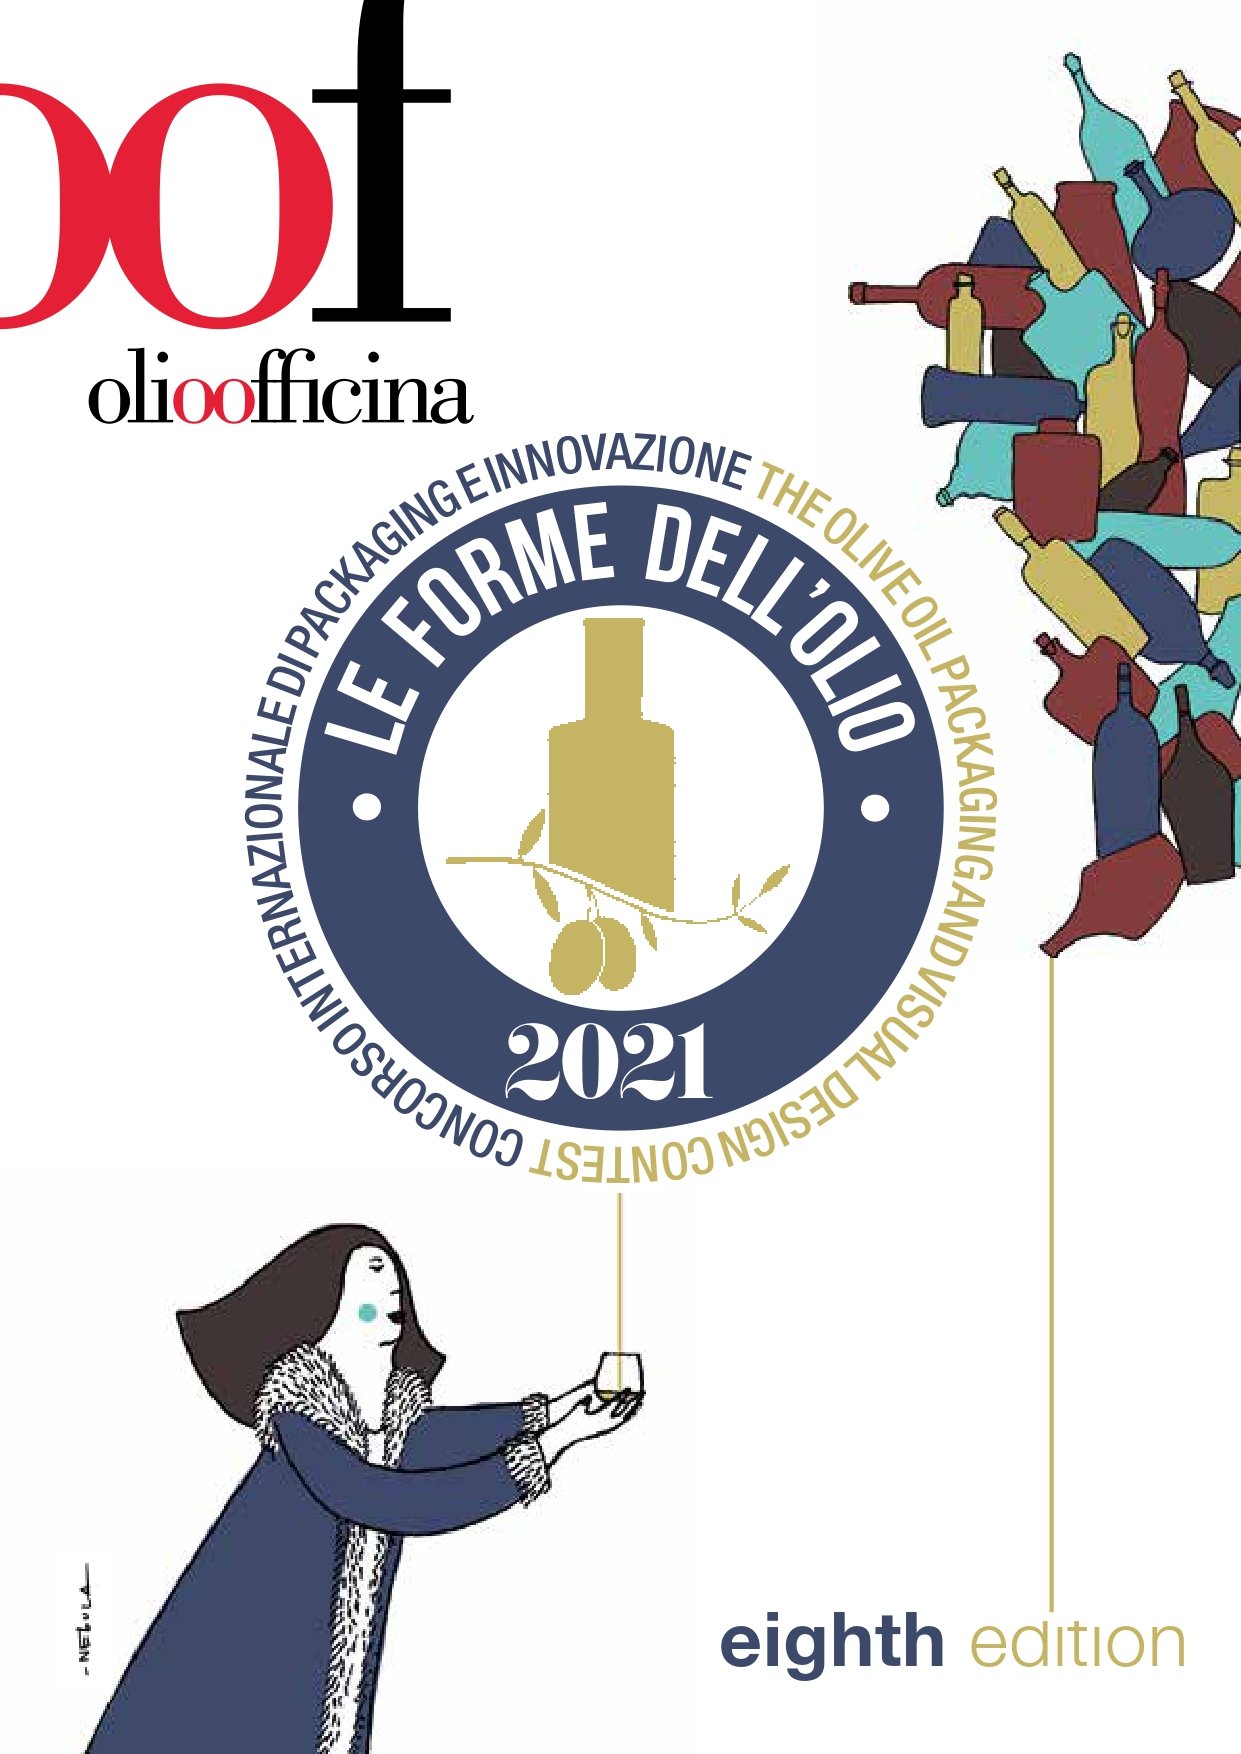 Last days to participate in the eighth edition of the Le Forme dell’Olio packaging and design contest for olive oils